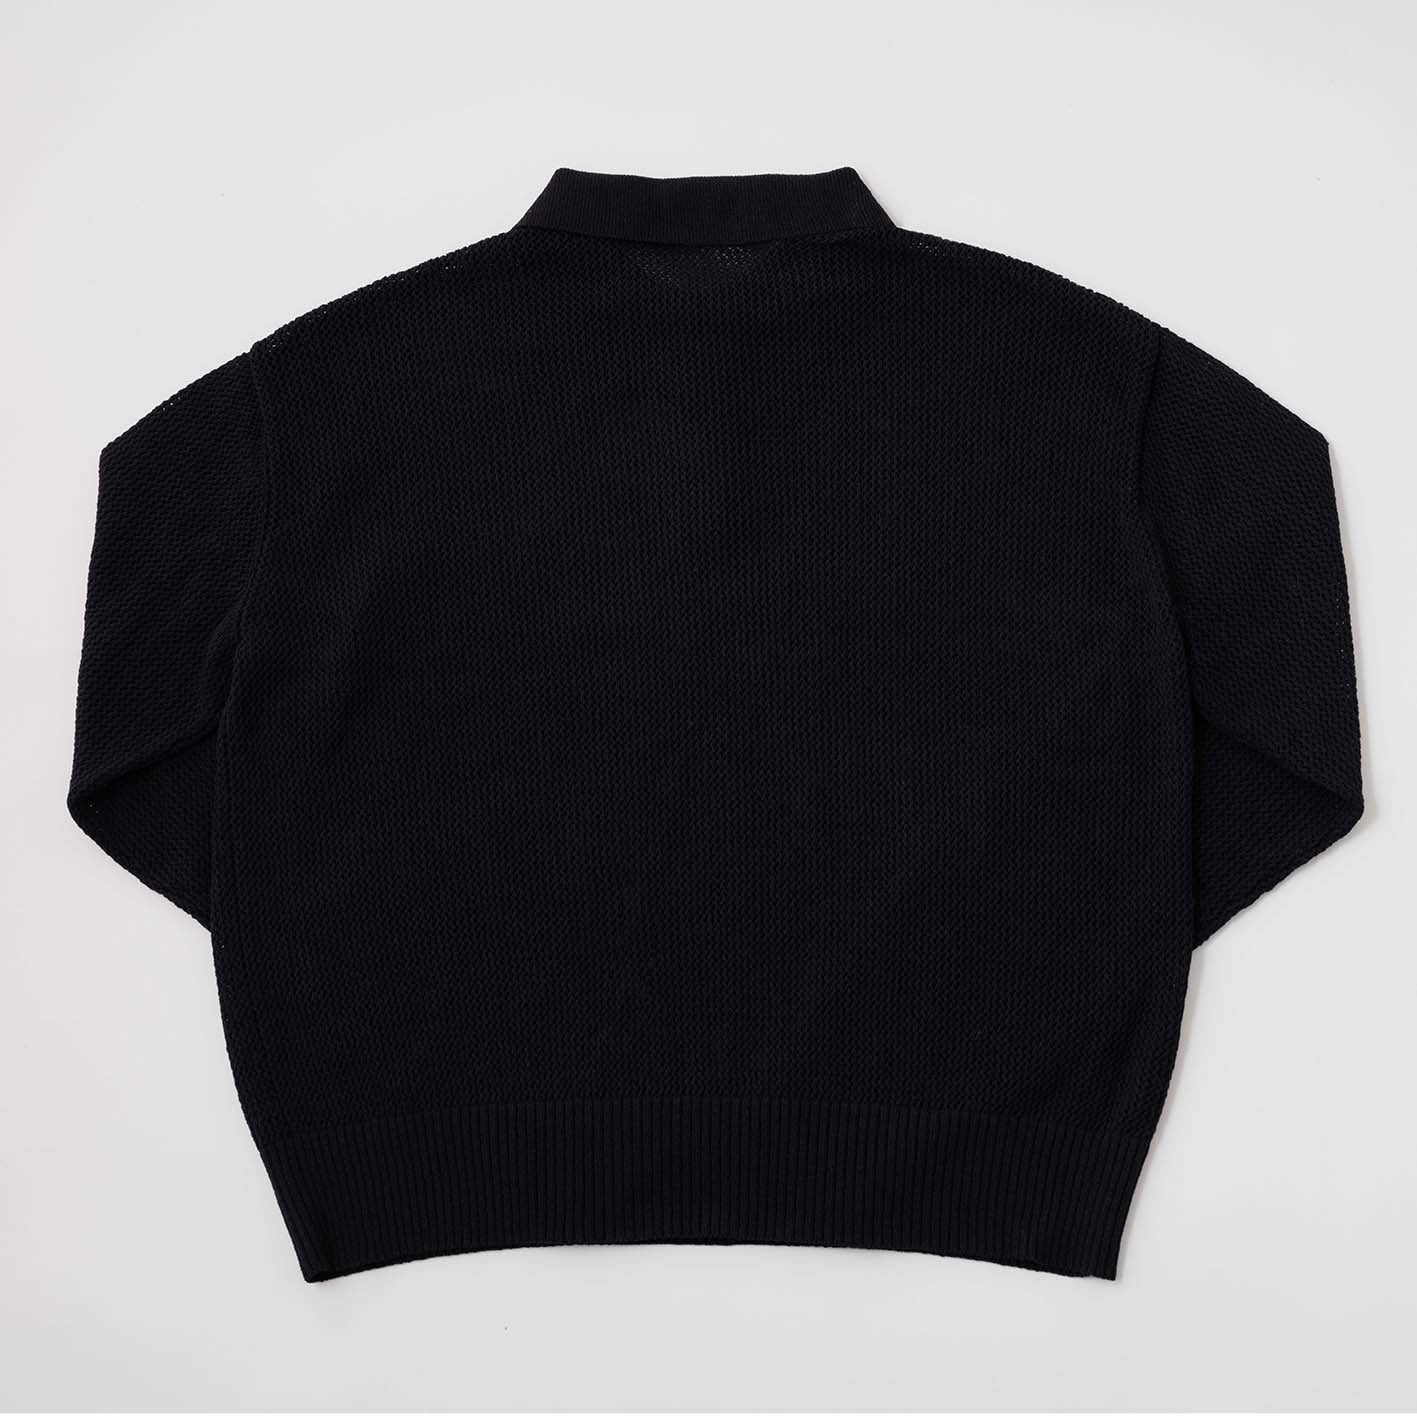 Over size knit polo